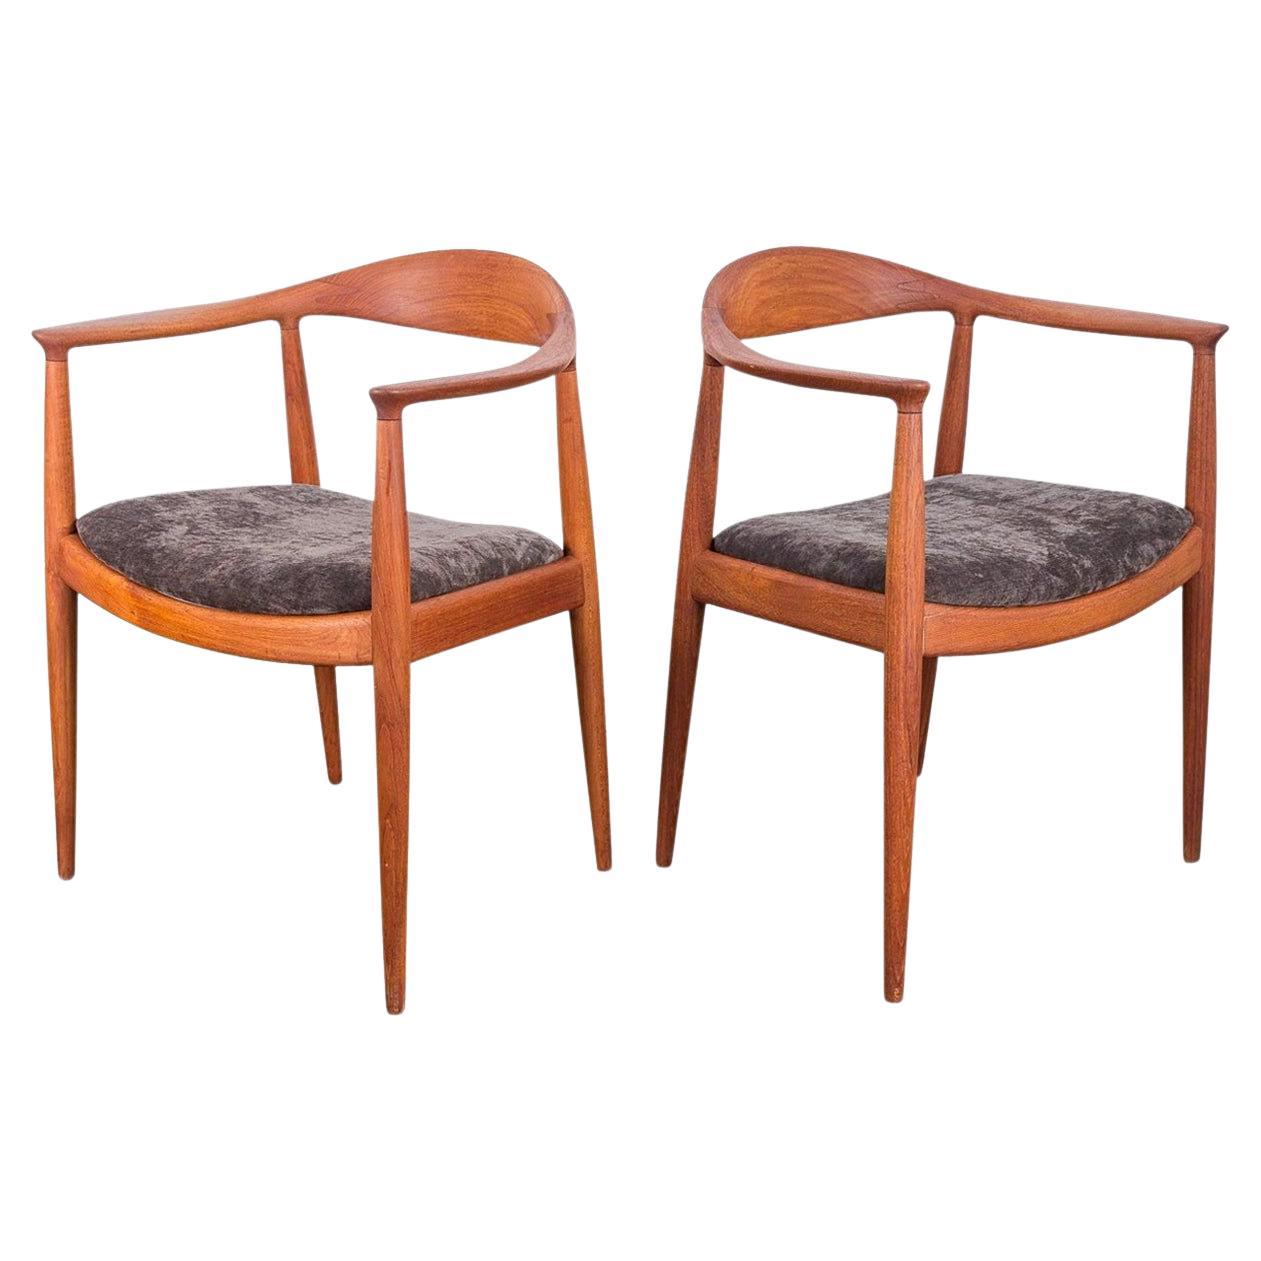 Pair of Hans Wegner Round Chairs For Sale